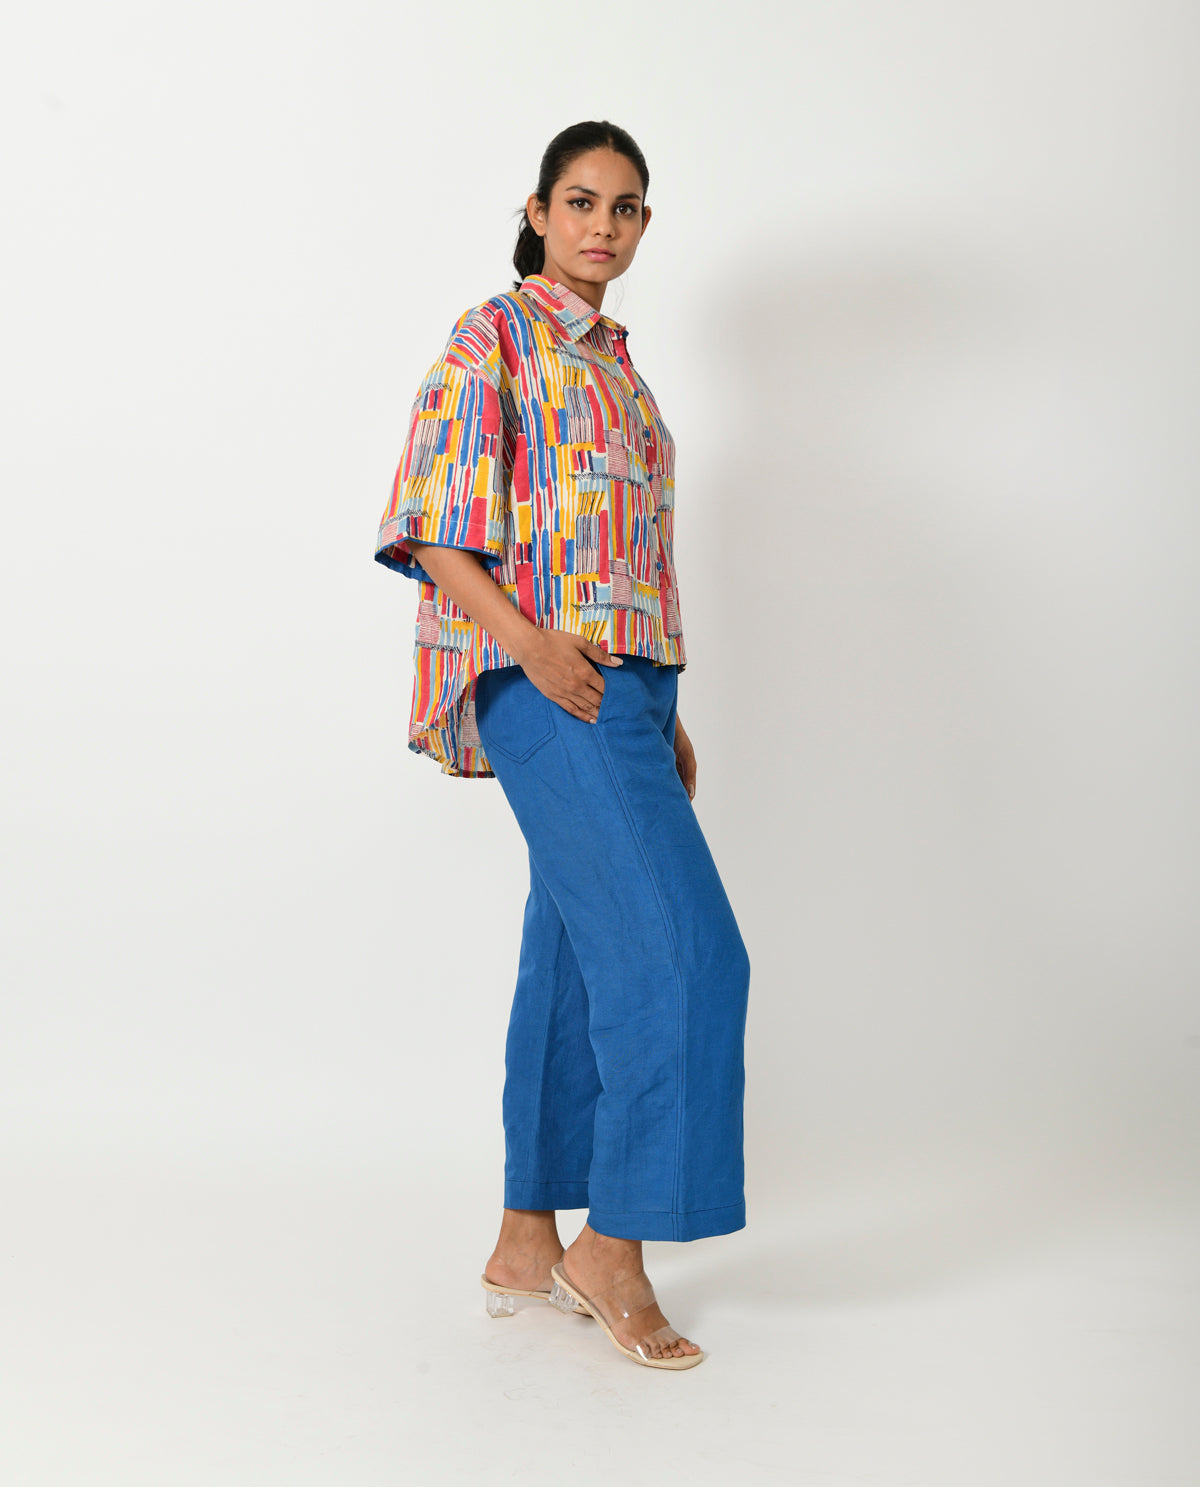 Multicolor Linen-Co-ord Set at Kamakhyaa by Rias Jaipur. This item is Casual Wear, Co-ord Sets, Linen Blend, Multicolor, Natural, Prints, Relaxed Fit, Scribble Prints, Vacation Co-ords, Womenswear, Yaadein